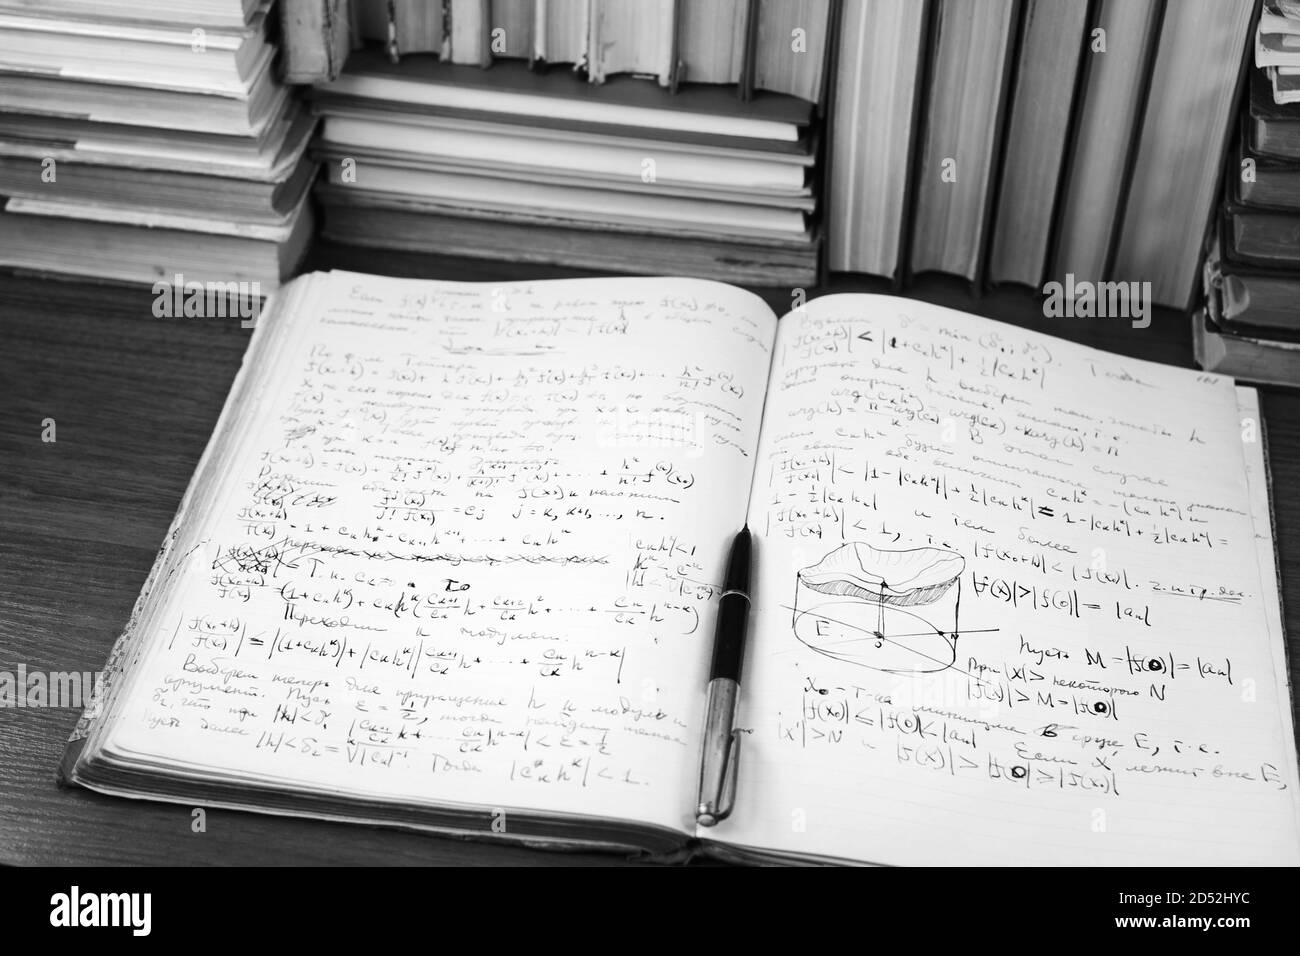 Open writing-book with mathematical lectures against a background of books Stock Photo